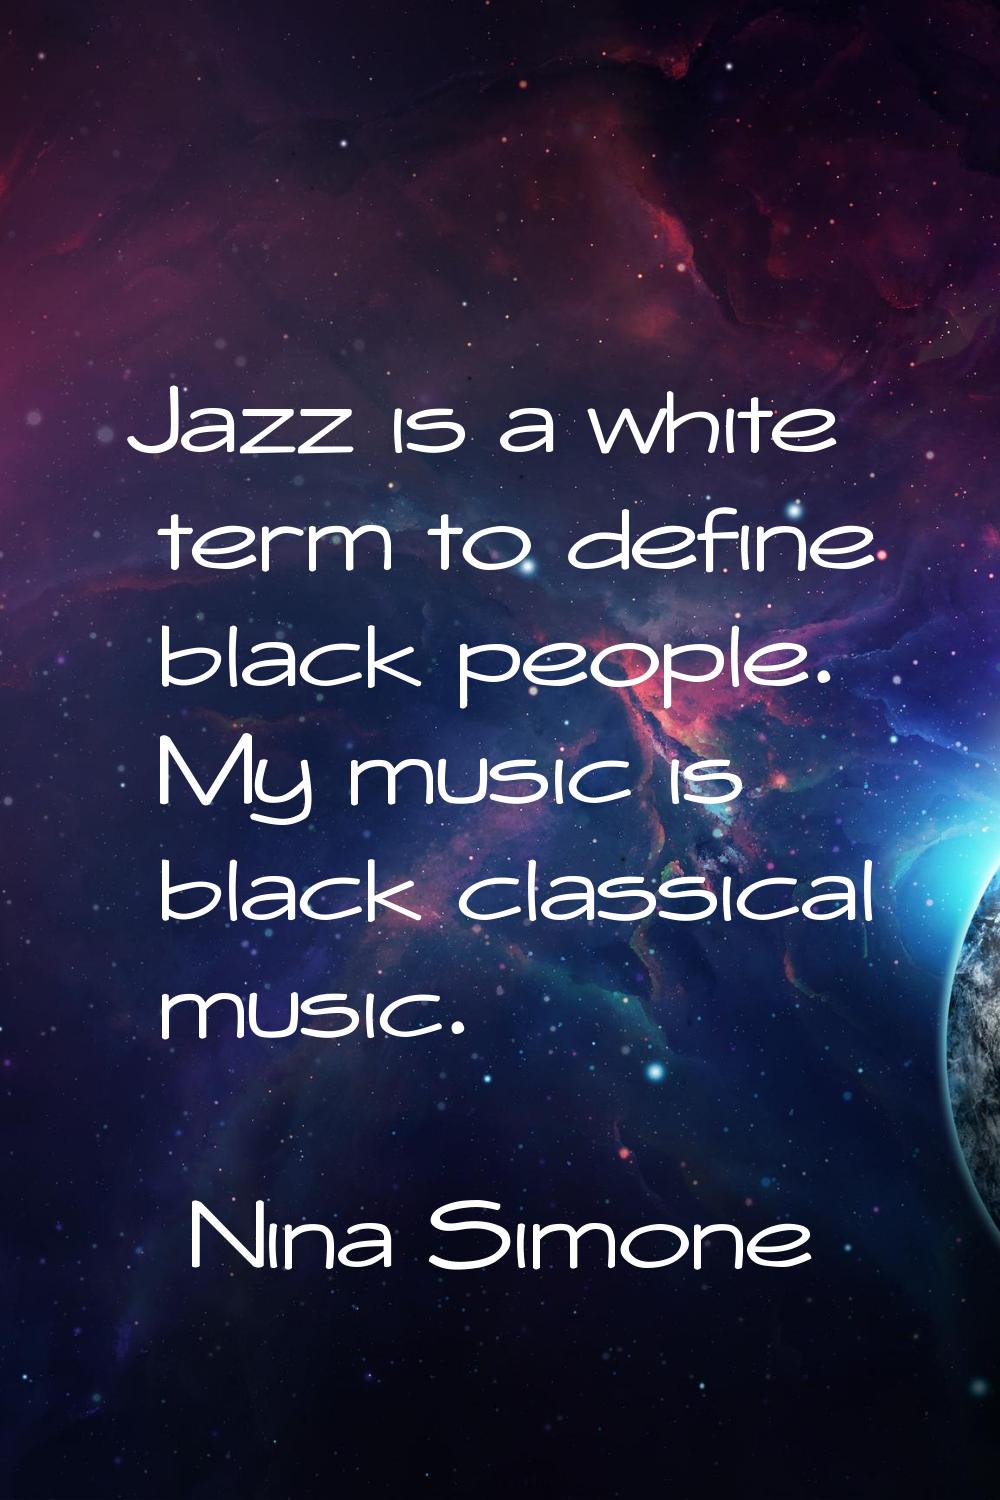 Jazz is a white term to define black people. My music is black classical music.